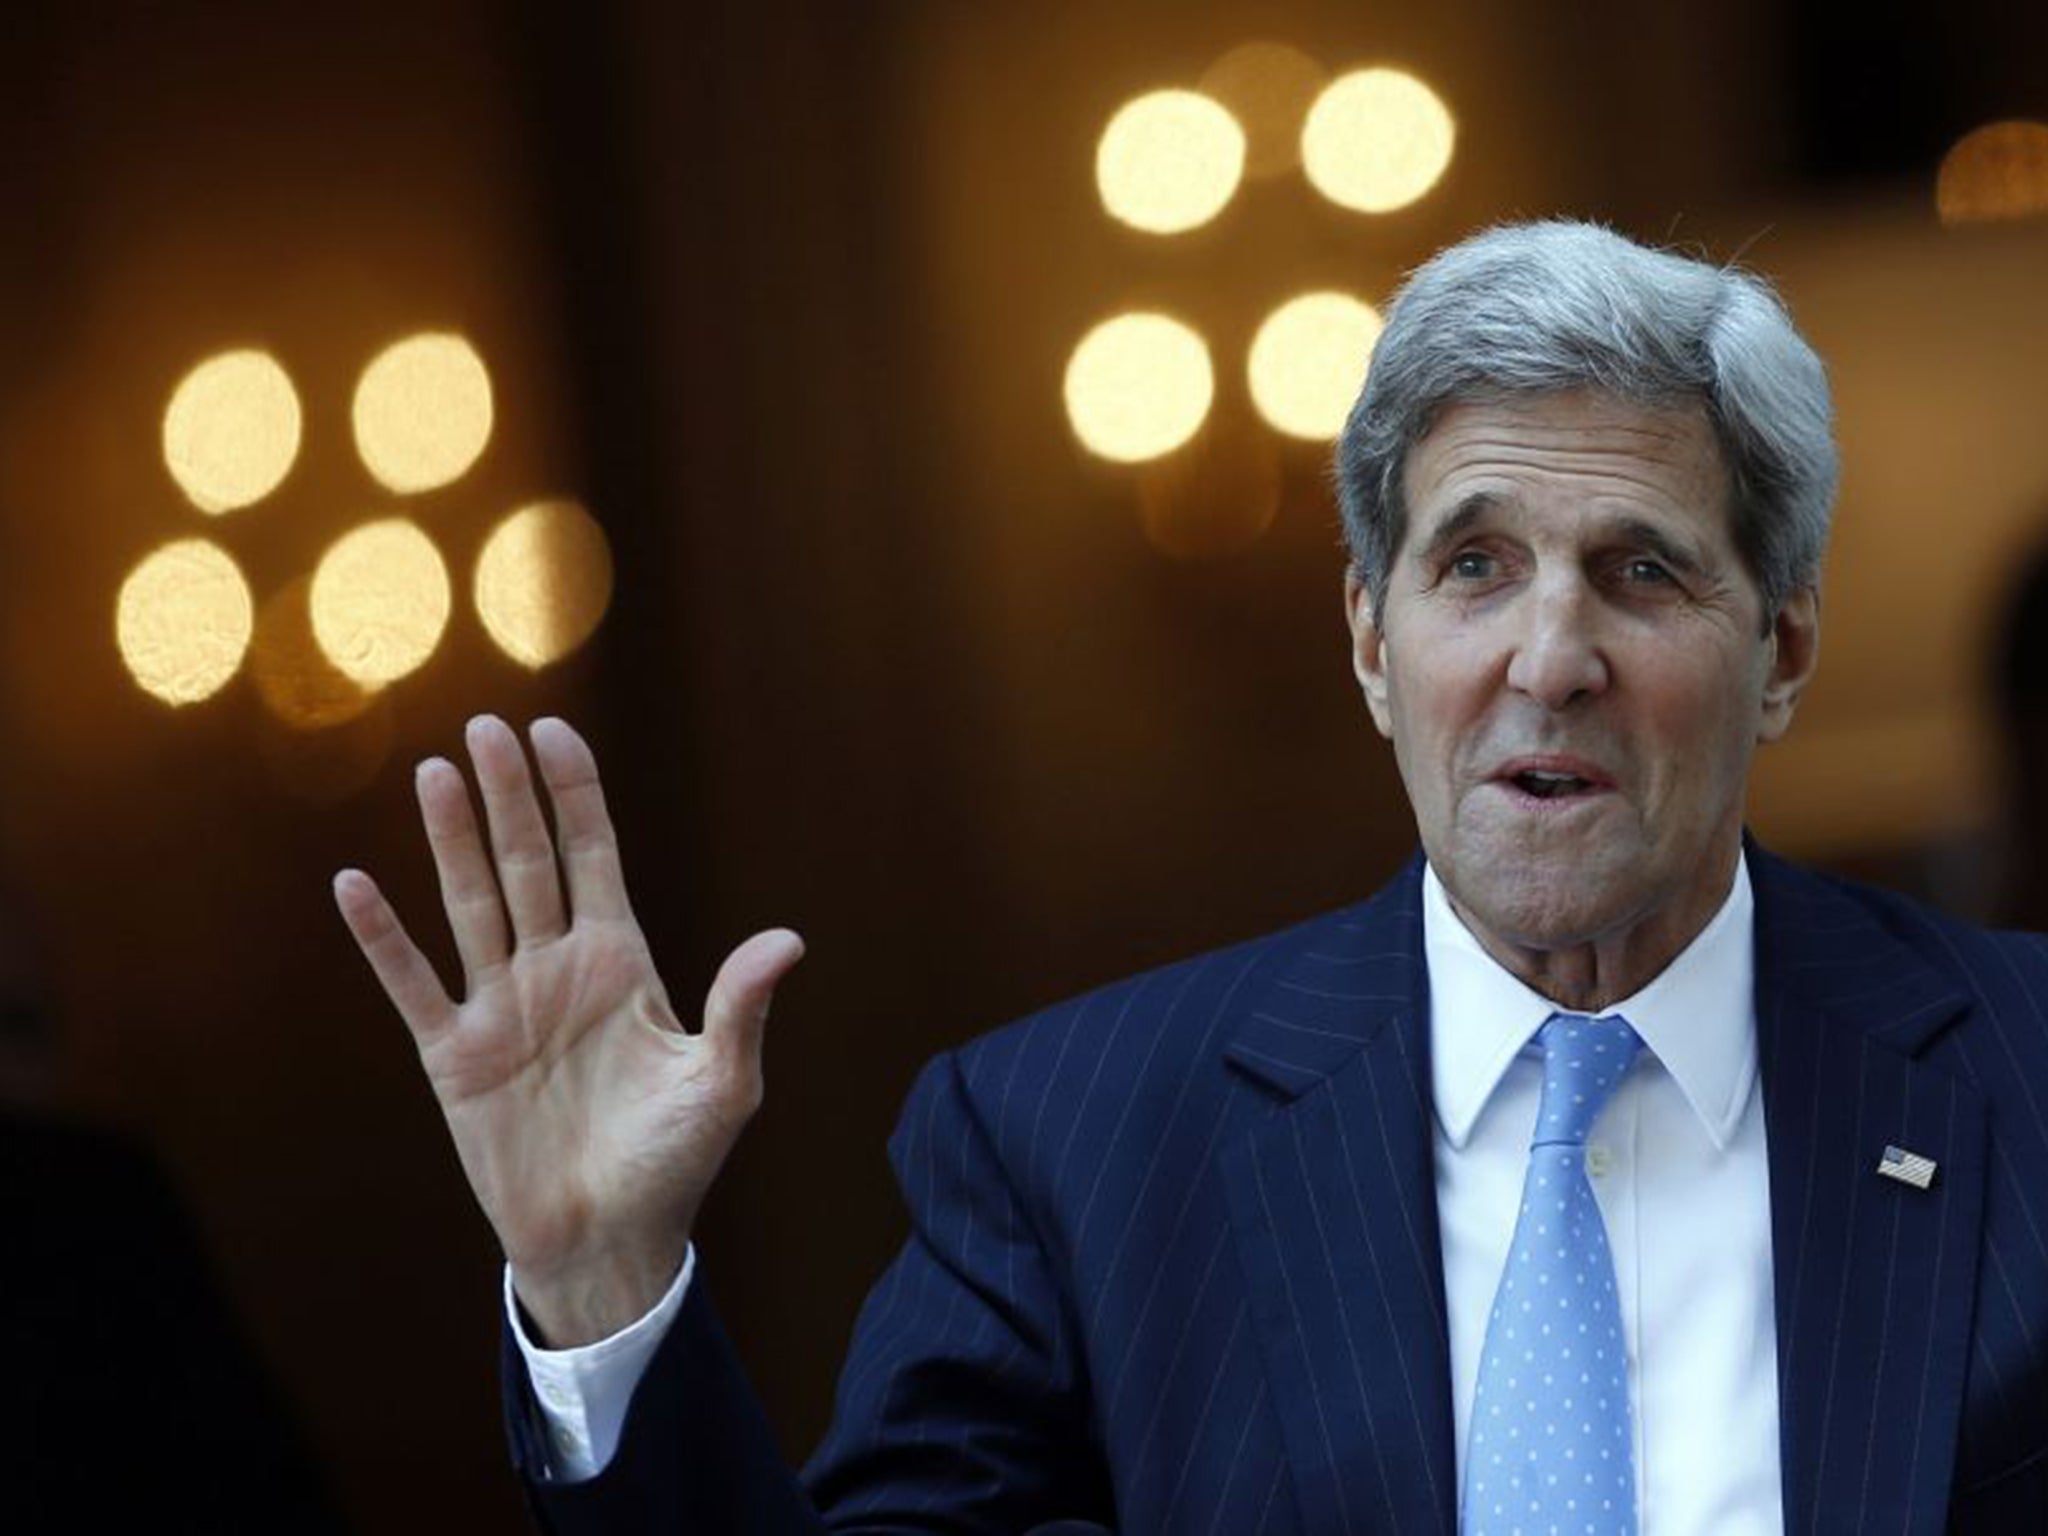 John Kerry said he was “hopeful” after a “very good meeting” with Iranian Foreign Minister Mohammad Javad Zarif